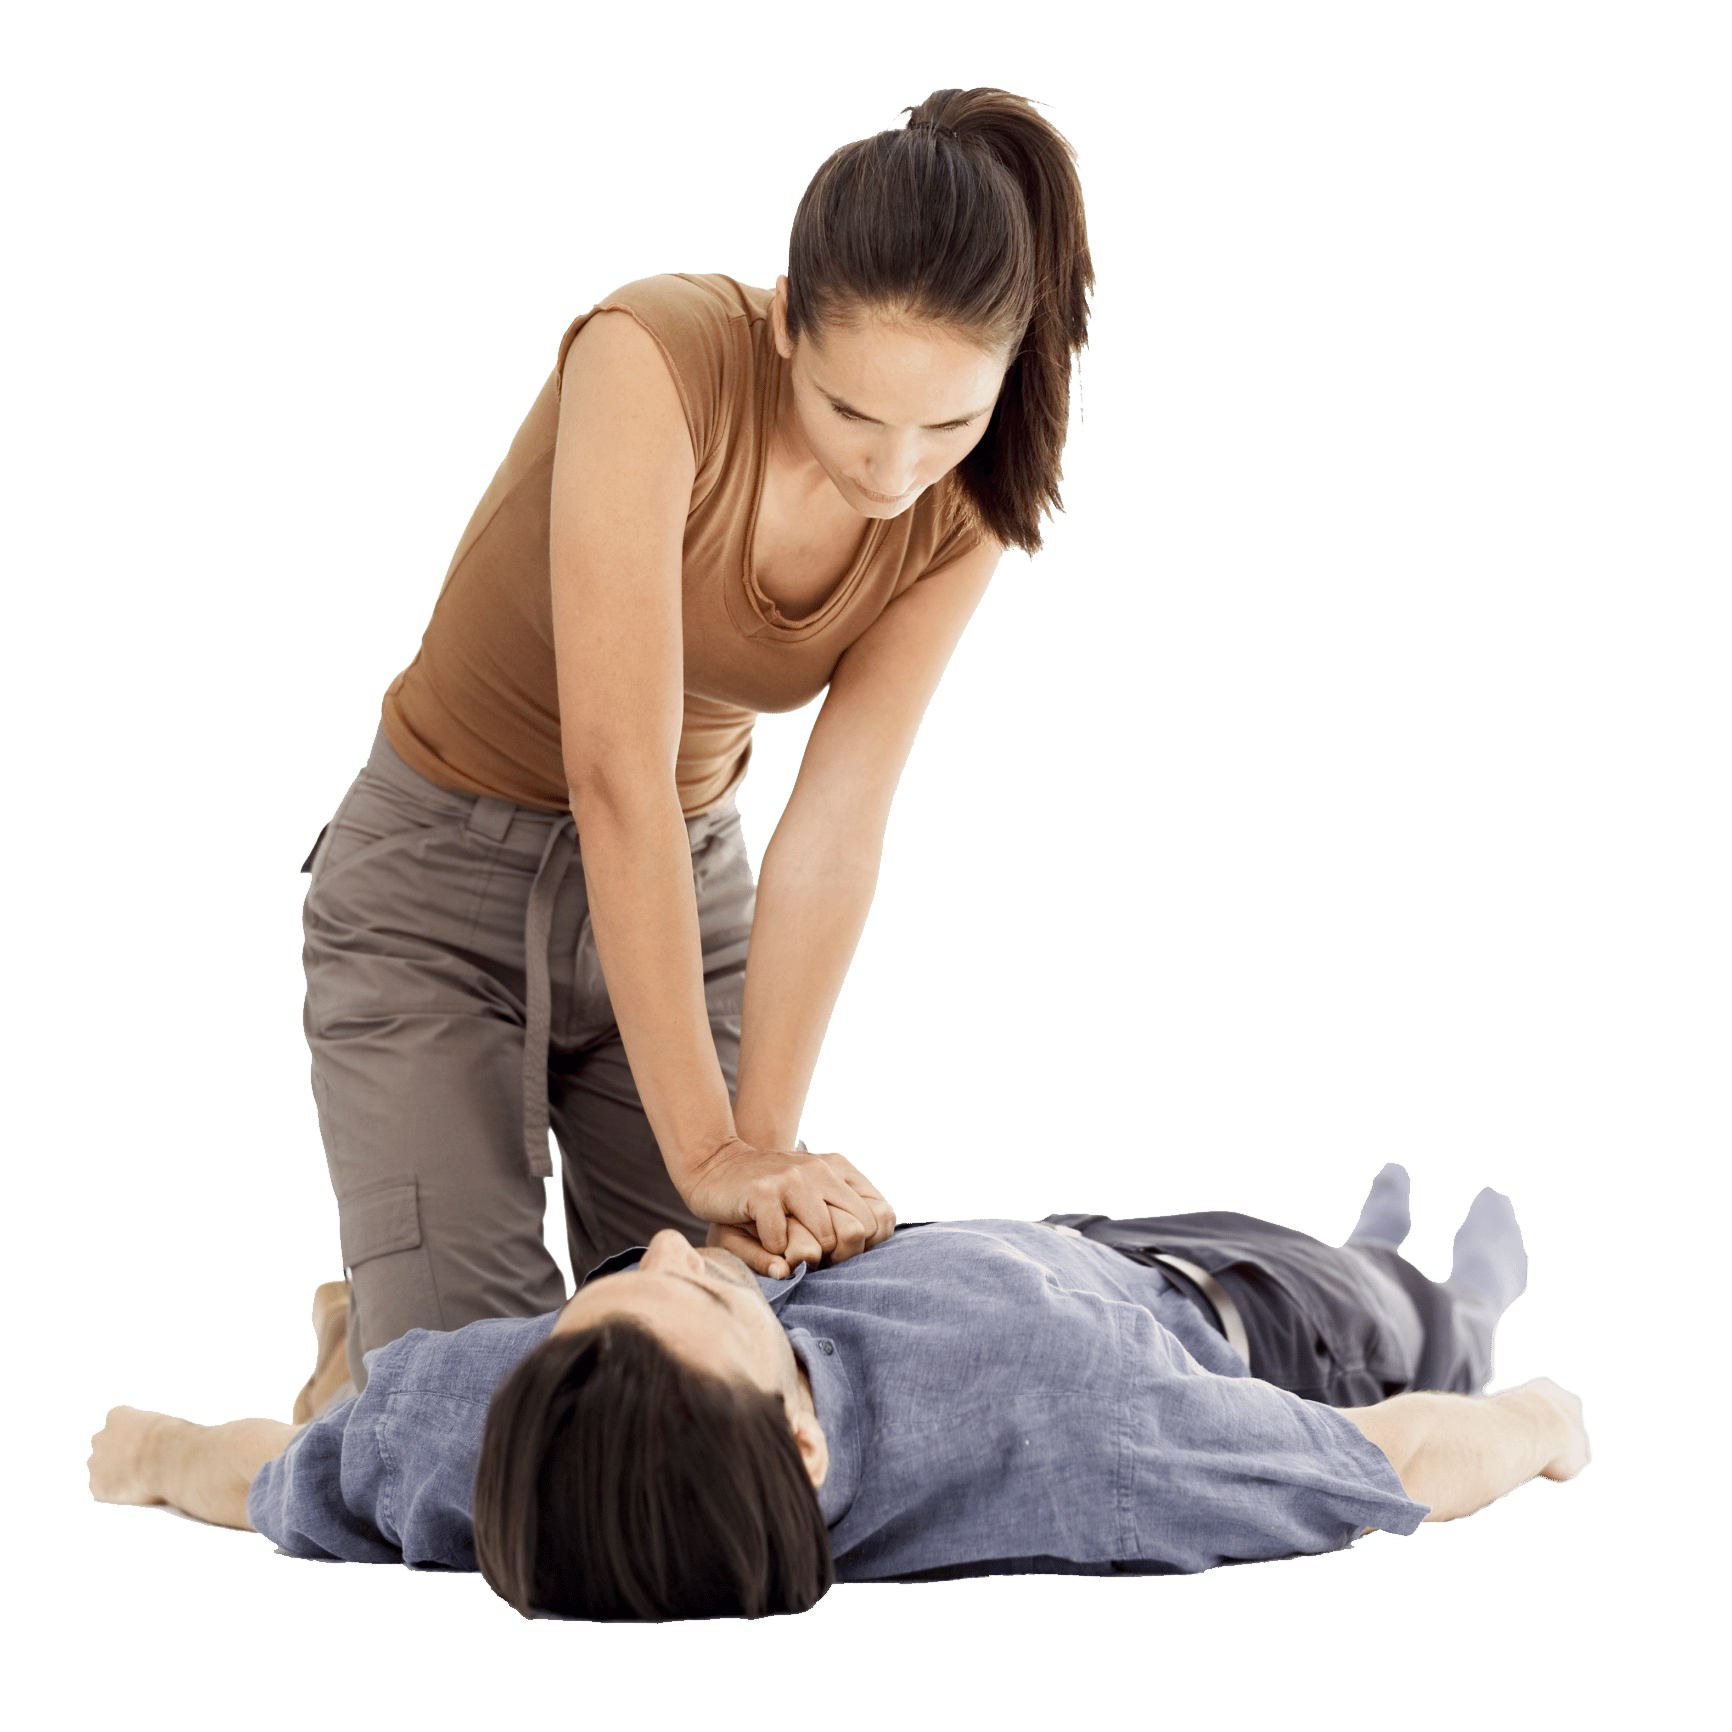 cpr and first aid training in Pearland